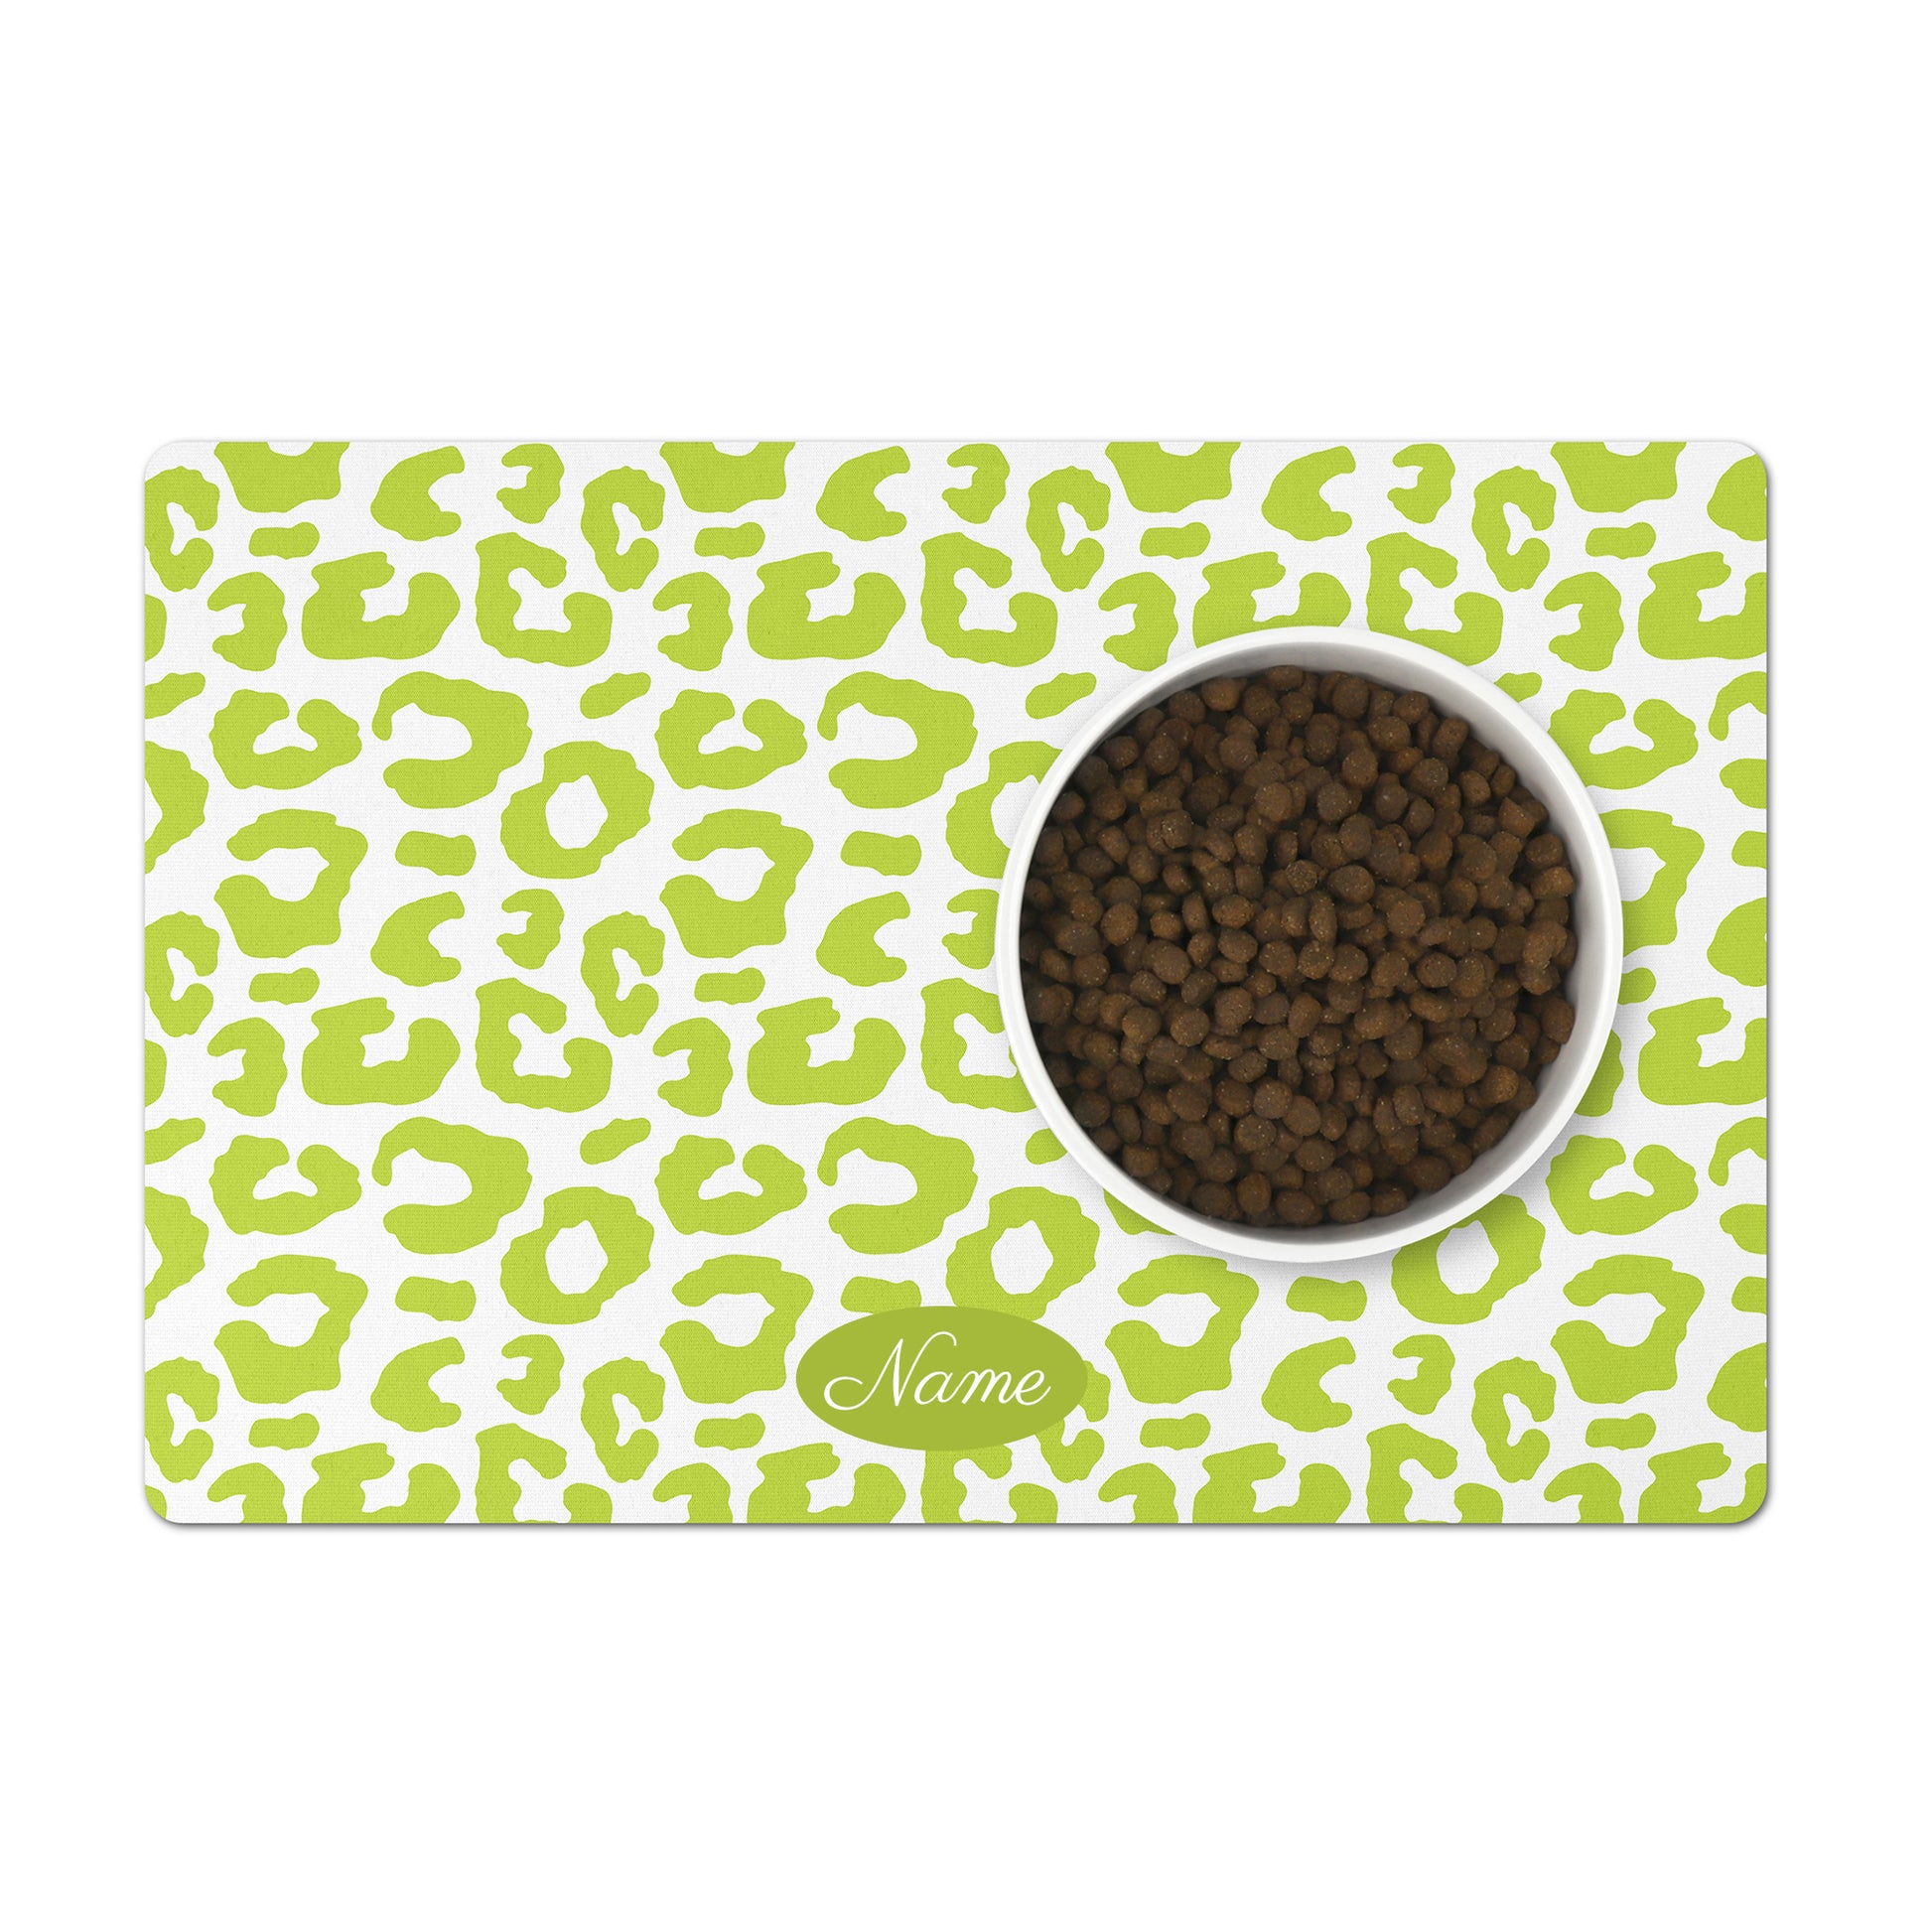 Personalized dog bowl mat in a leaf green and white leopard print.